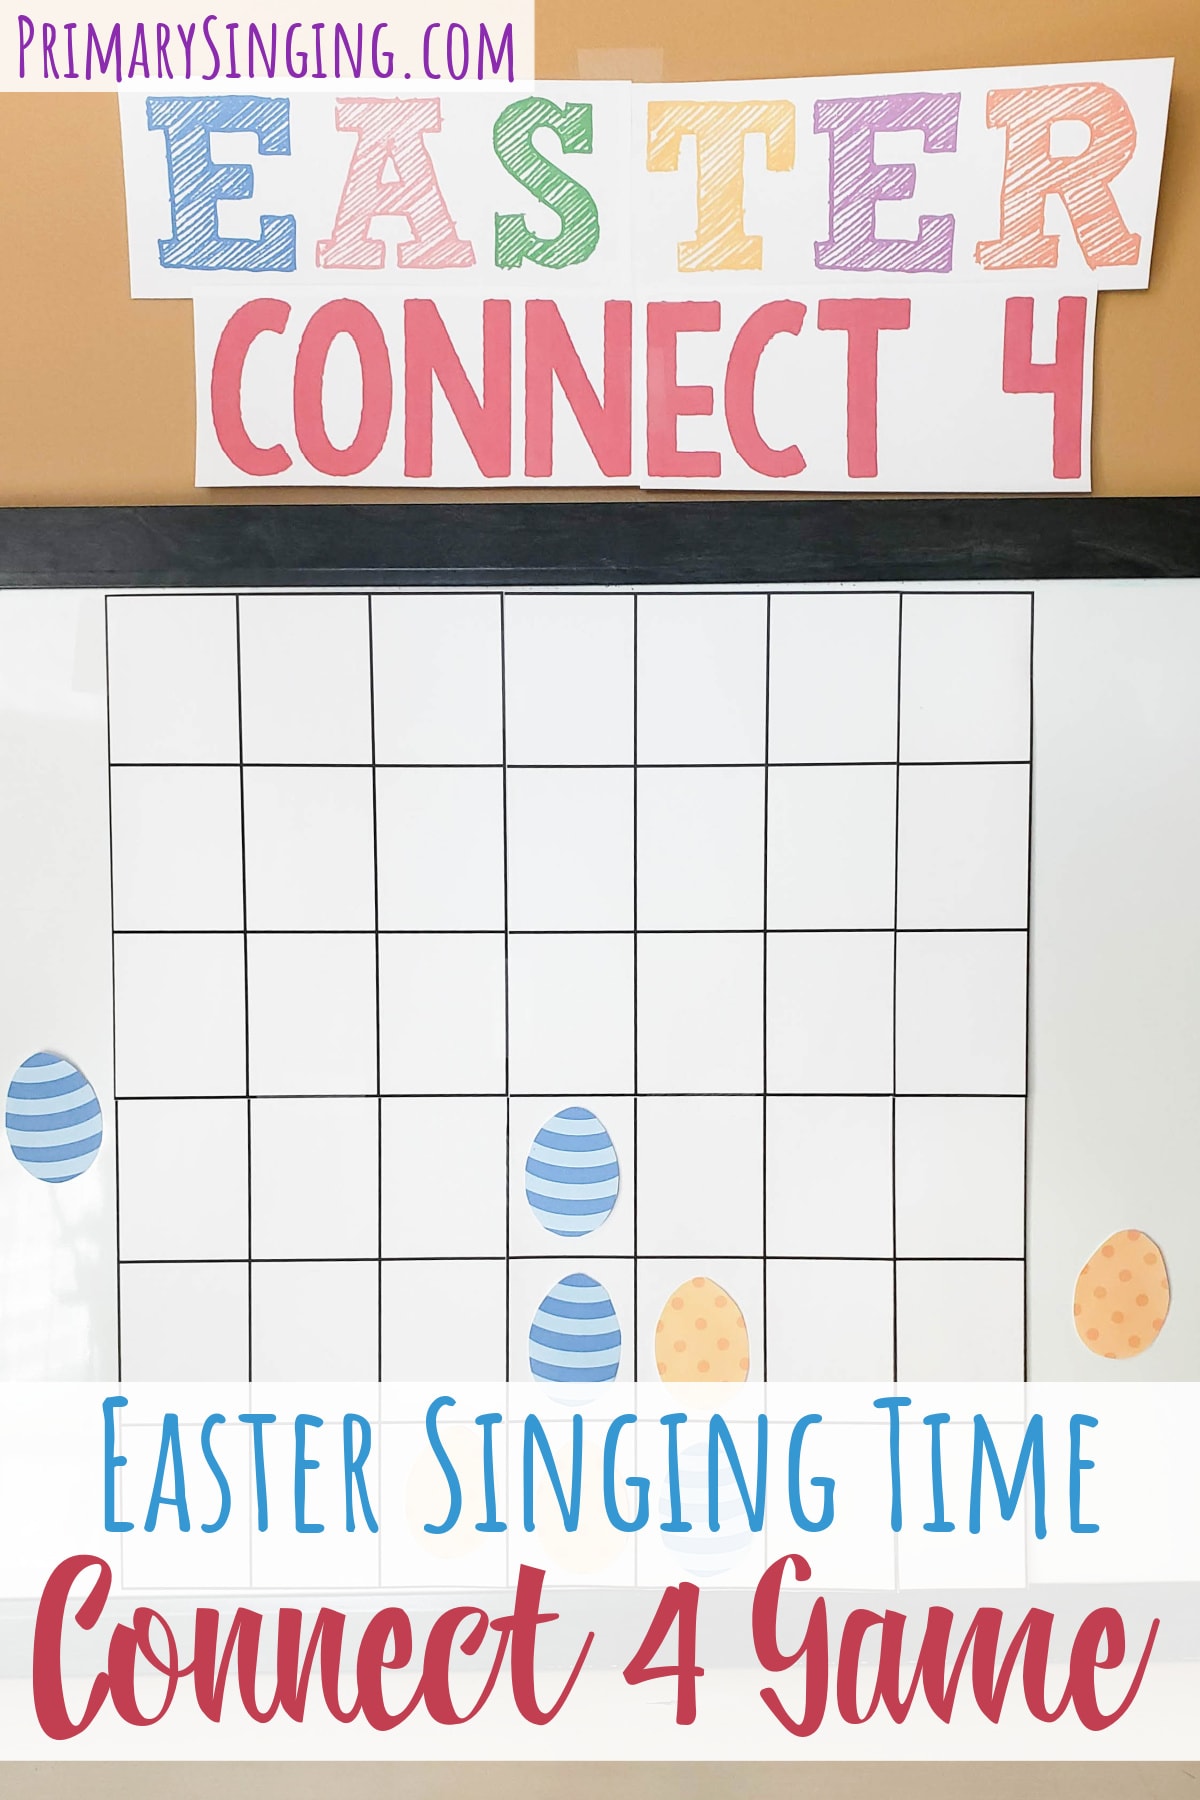 Easter Primary Connect 4 singing time game - Use these cute printable song helps to play a fun game together as a Primary perfectly themed for Easter! Includes a Connect 4 game board and colorful Easter eggs as game pieces. LDS Primary music leaders.